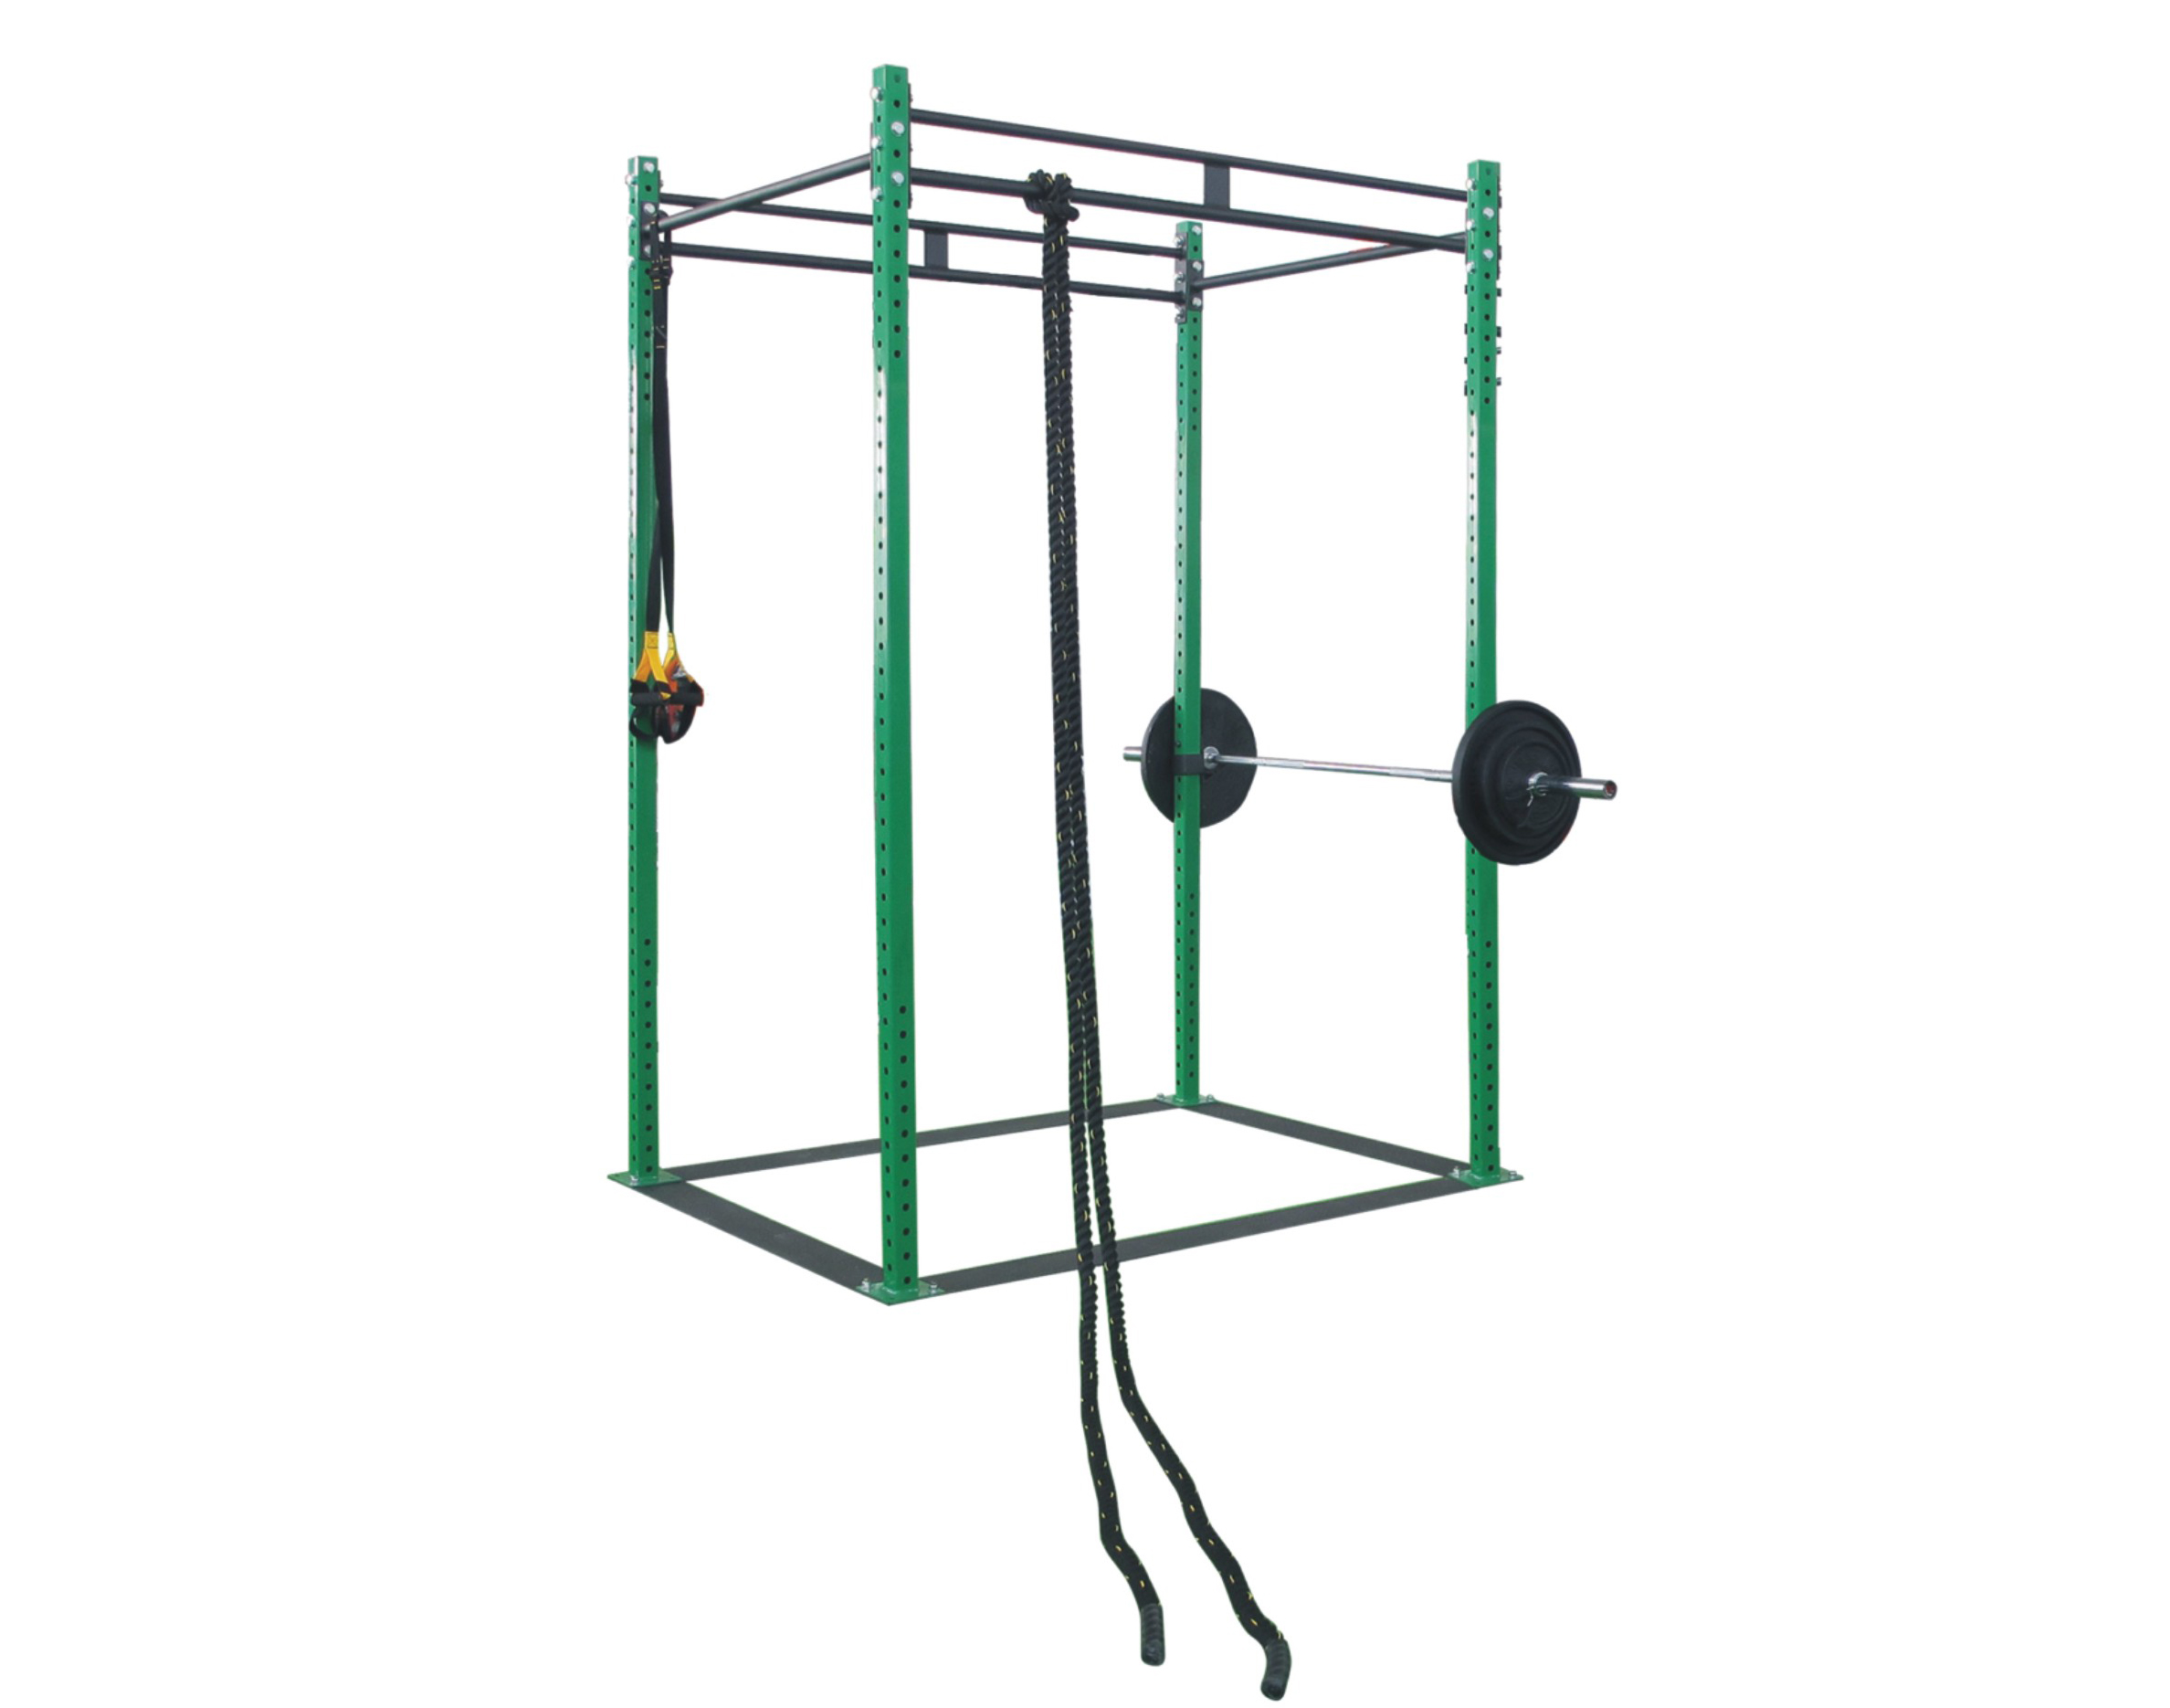 Essential Adjustable Power Rack Squat Stand, Power Cage